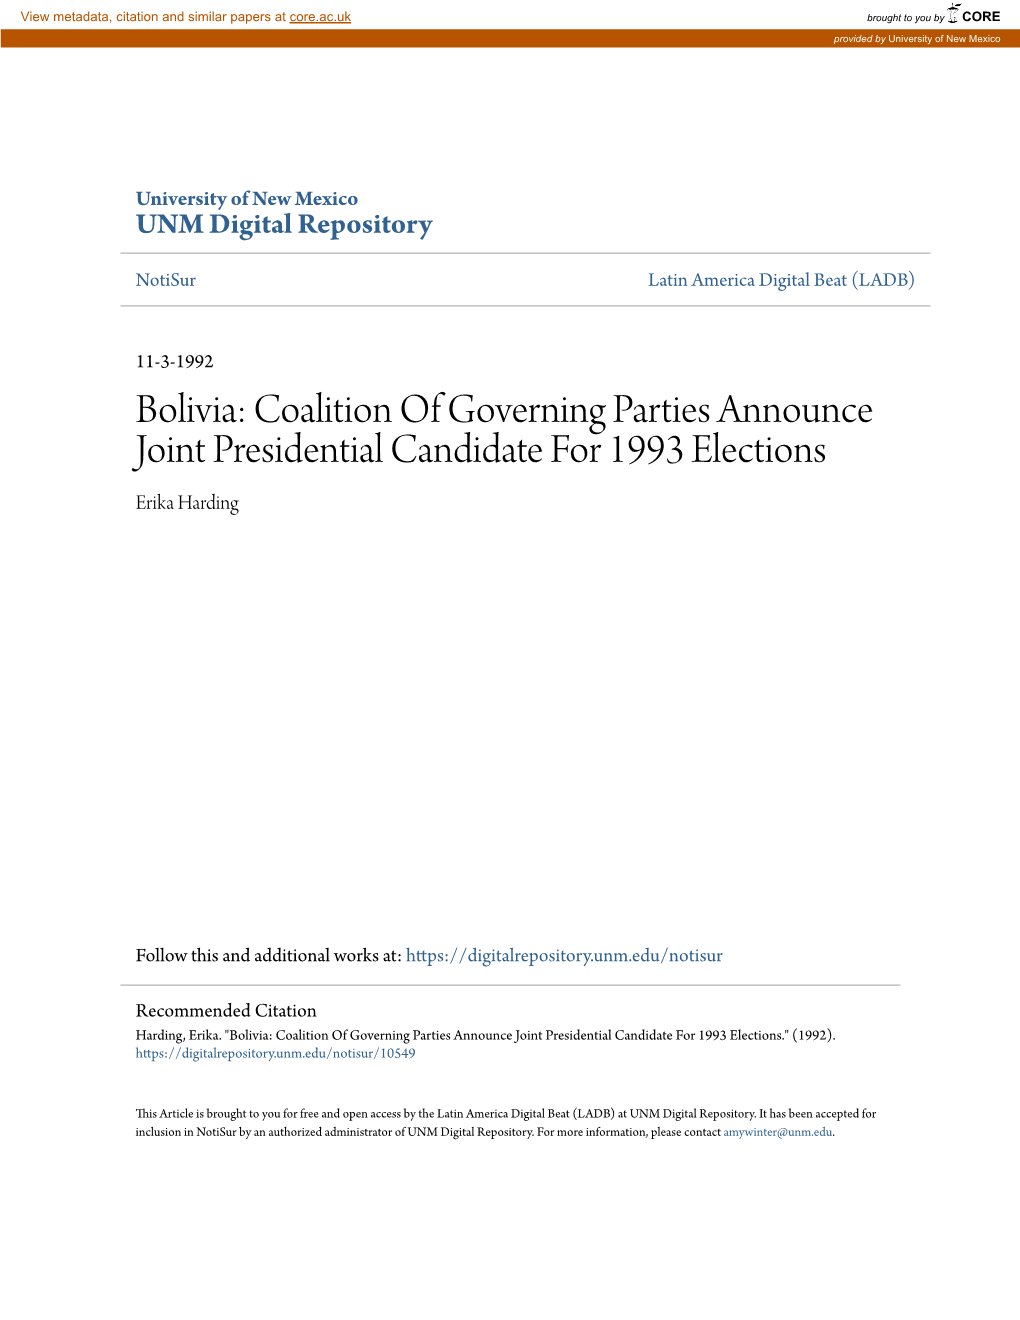 Bolivia: Coalition of Governing Parties Announce Joint Presidential Candidate for 1993 Elections Erika Harding